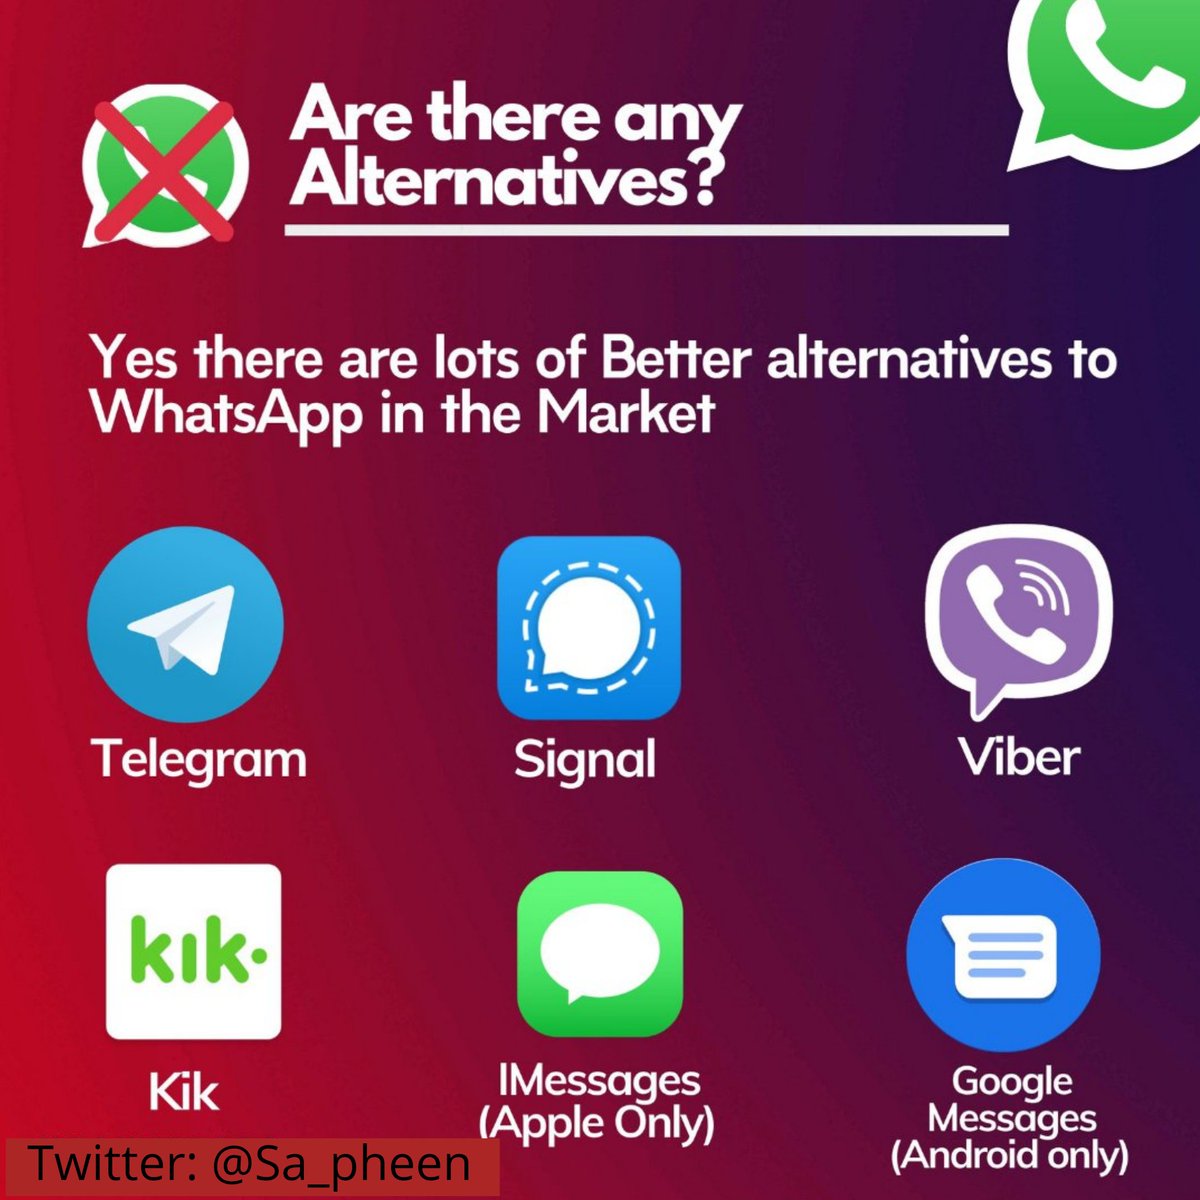 Do you know about new WhatsApp policy ?
Here is some info for you that may help you decide if you want to keep using whatsApp or shift to another app.
#free #business #DigitalMarketing
#thursdayvibes #WhatsappPrivacy
#WhatsApp #Facebook #Privacy #Alternatives #NewPolicy